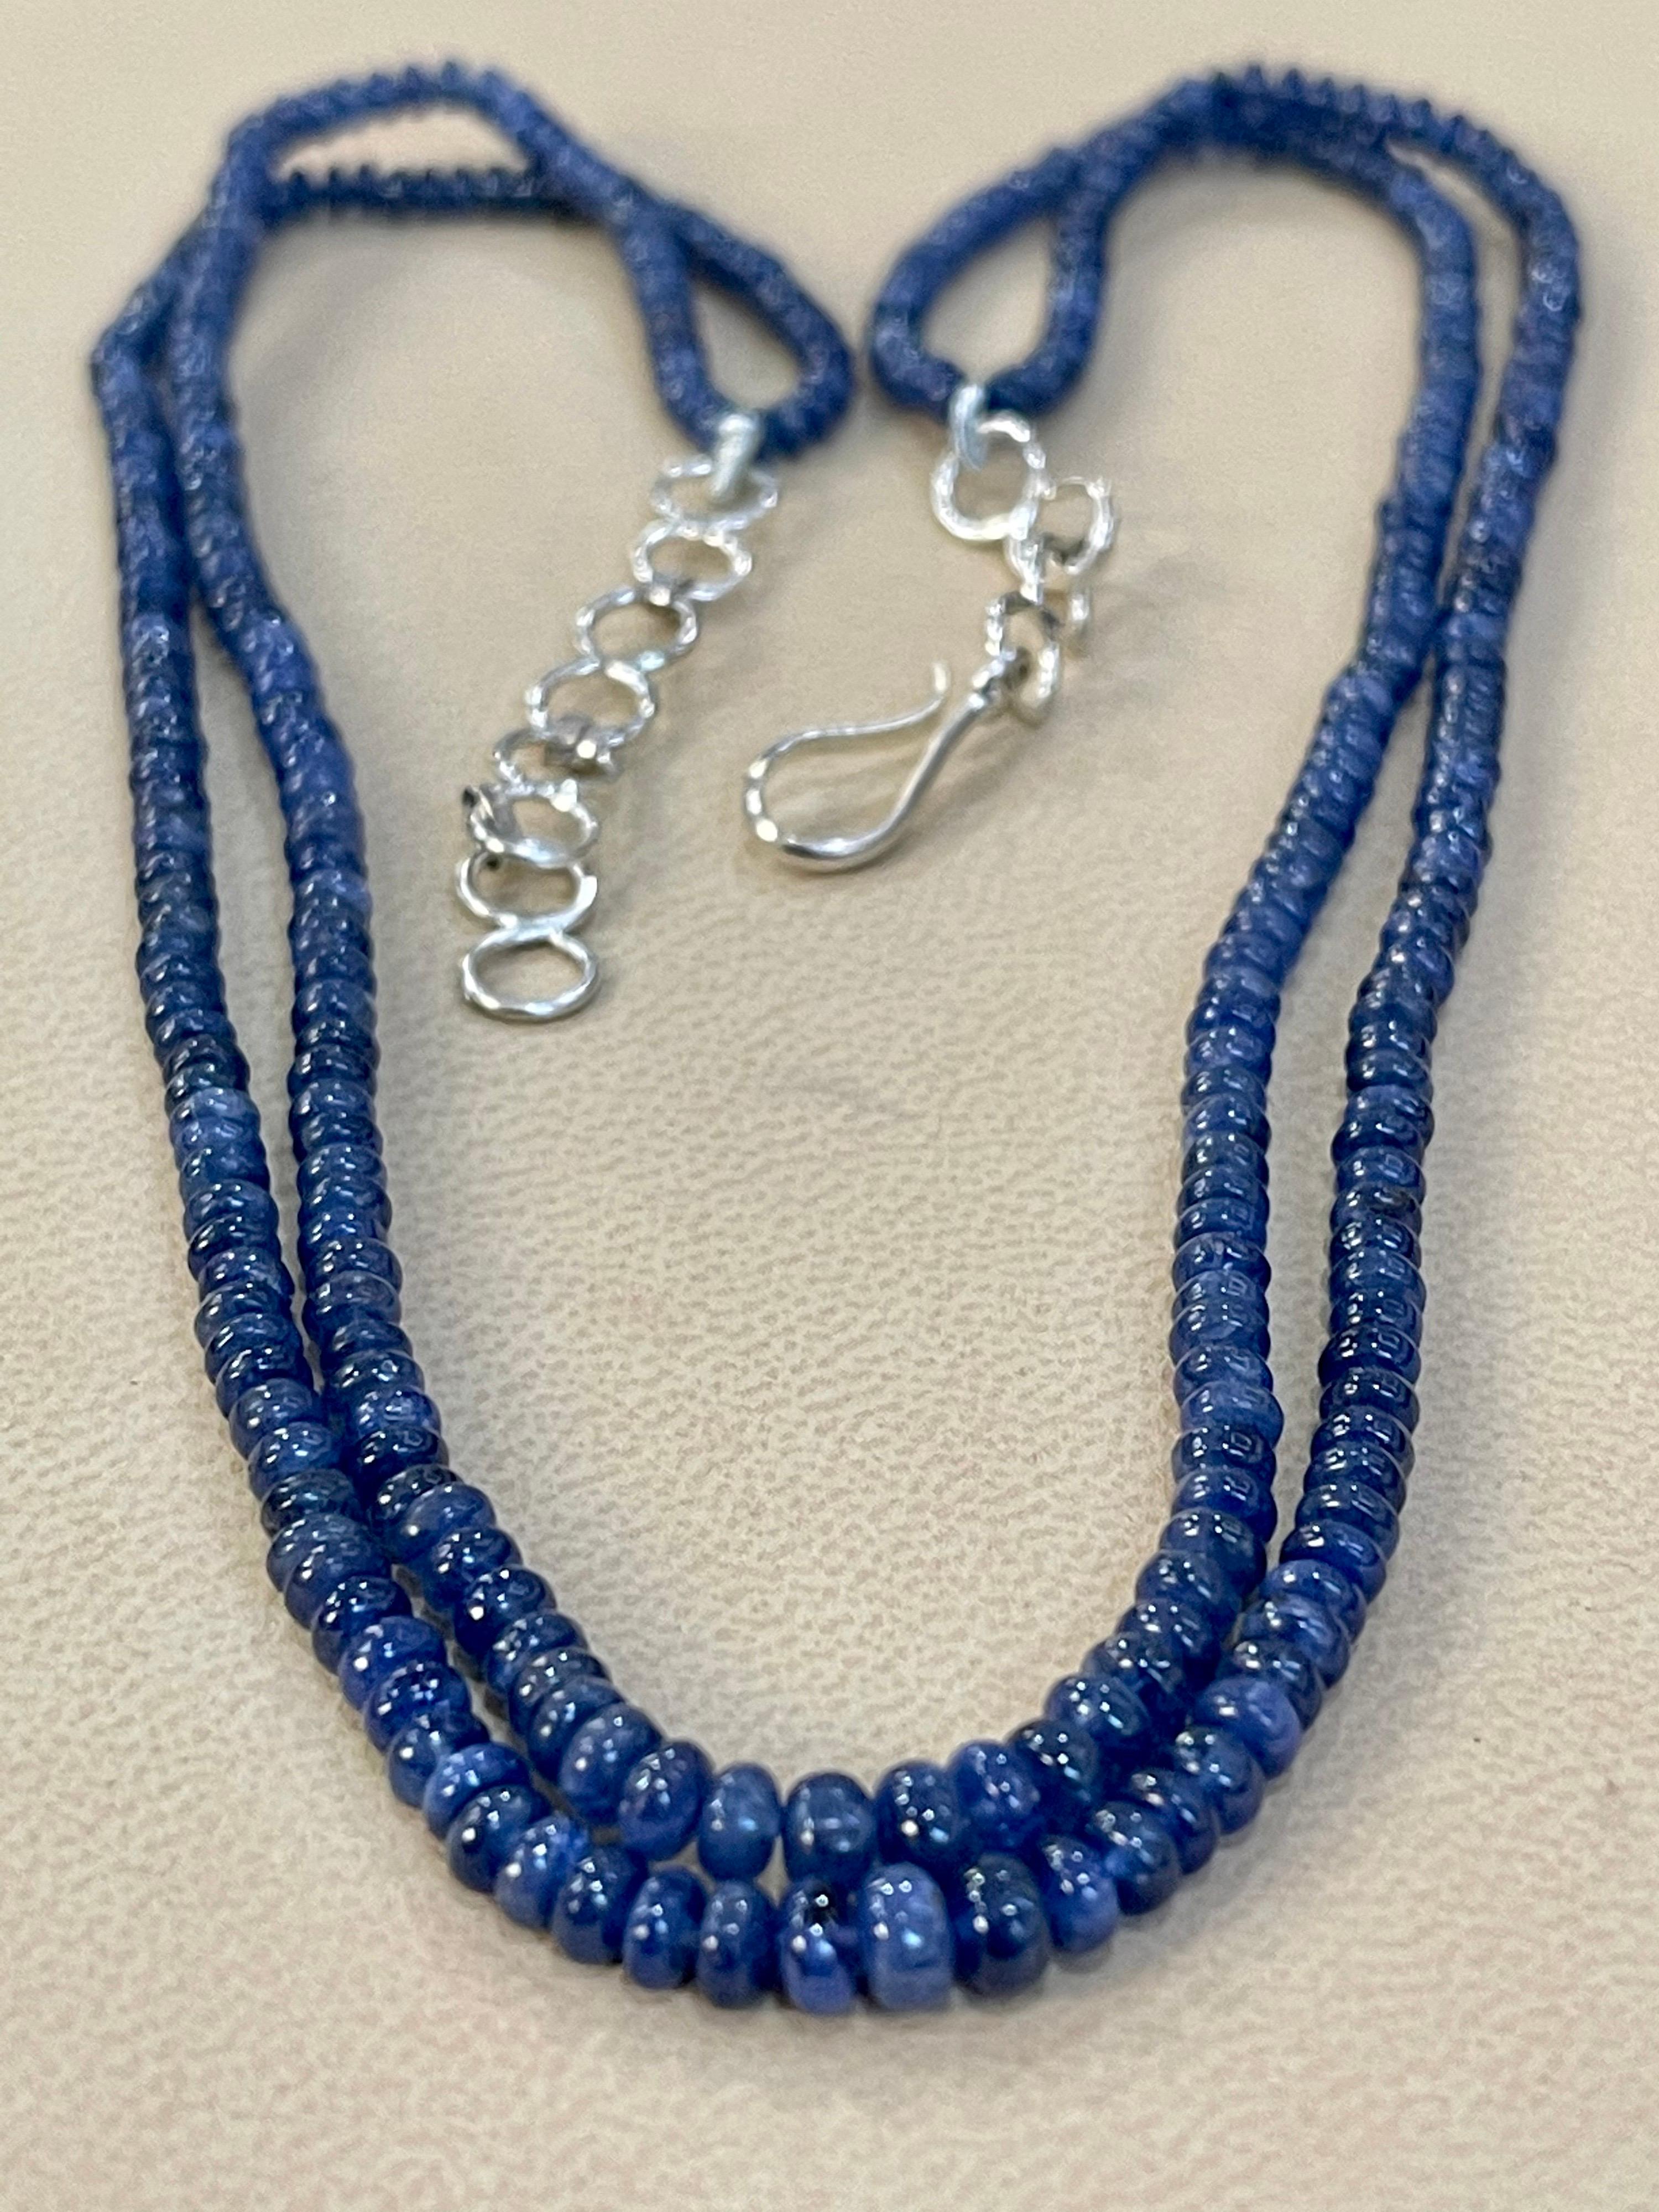 Natural  approximately  105 Ct Natural Sapphire  Bead double  Strand Necklace sterling silver adjustable clasp
All natural beads , no color enhancement
14